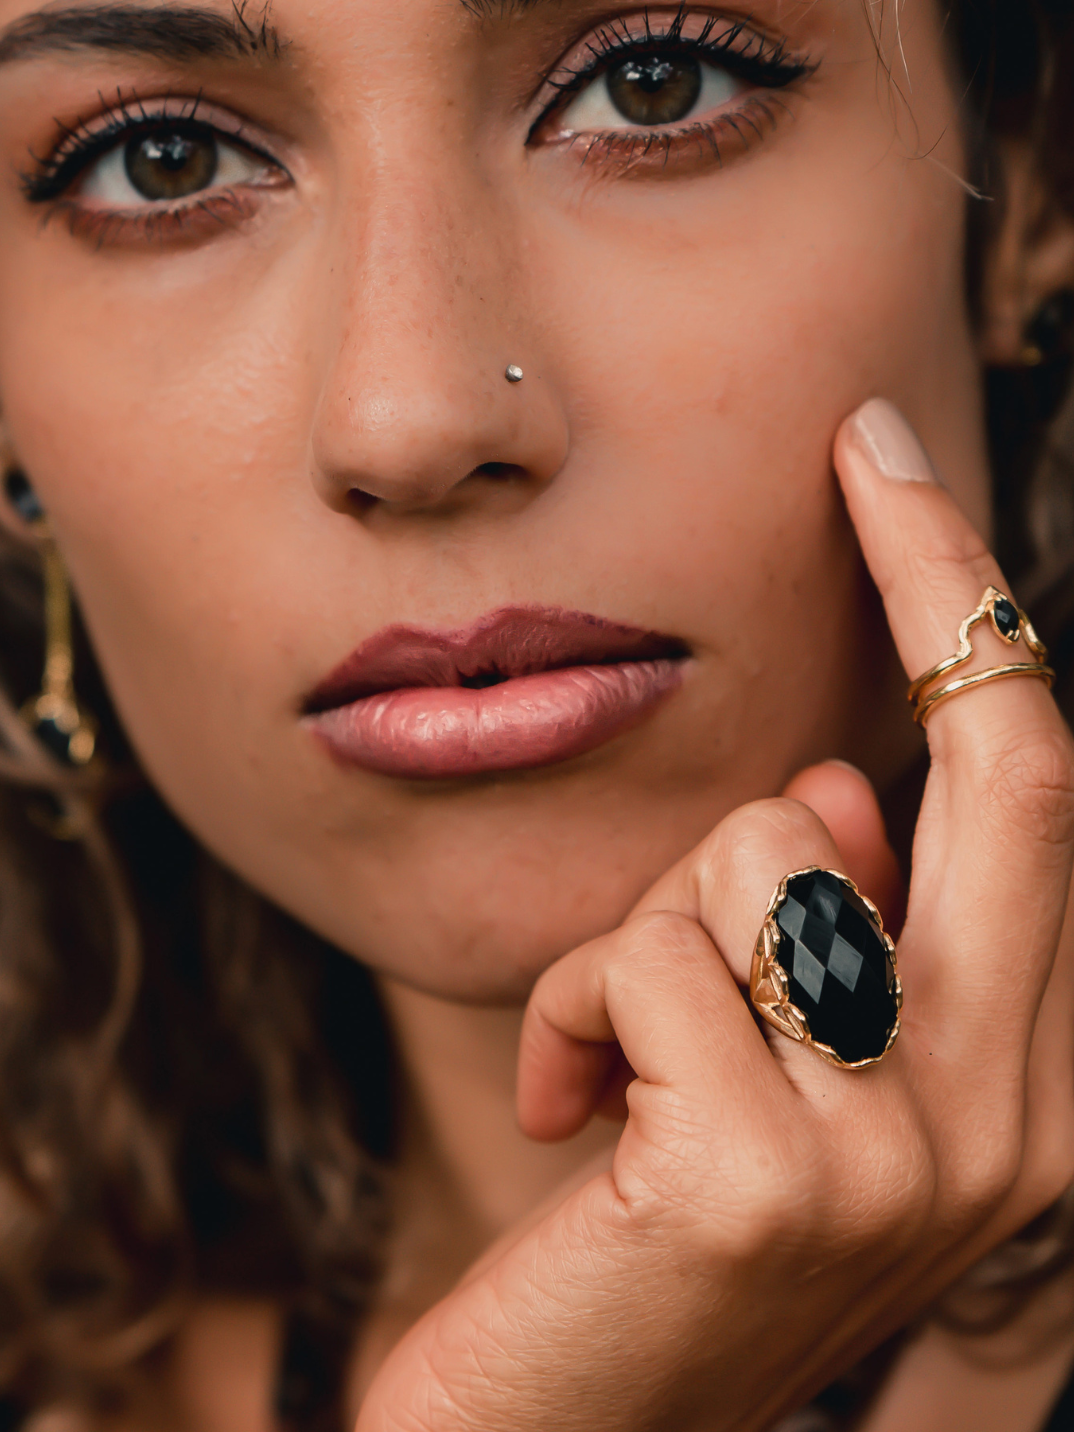 Influenced by palace archways which you can see subtly through the prongs that hold the stone in place. You can’t go wrong with this remarkable jet black semi precious stone surrounded by luxurious gold. Made with the finest workmanship you'll wear this piece for a lifetime!  Ethical handcrafted jewelry sustainable fashion